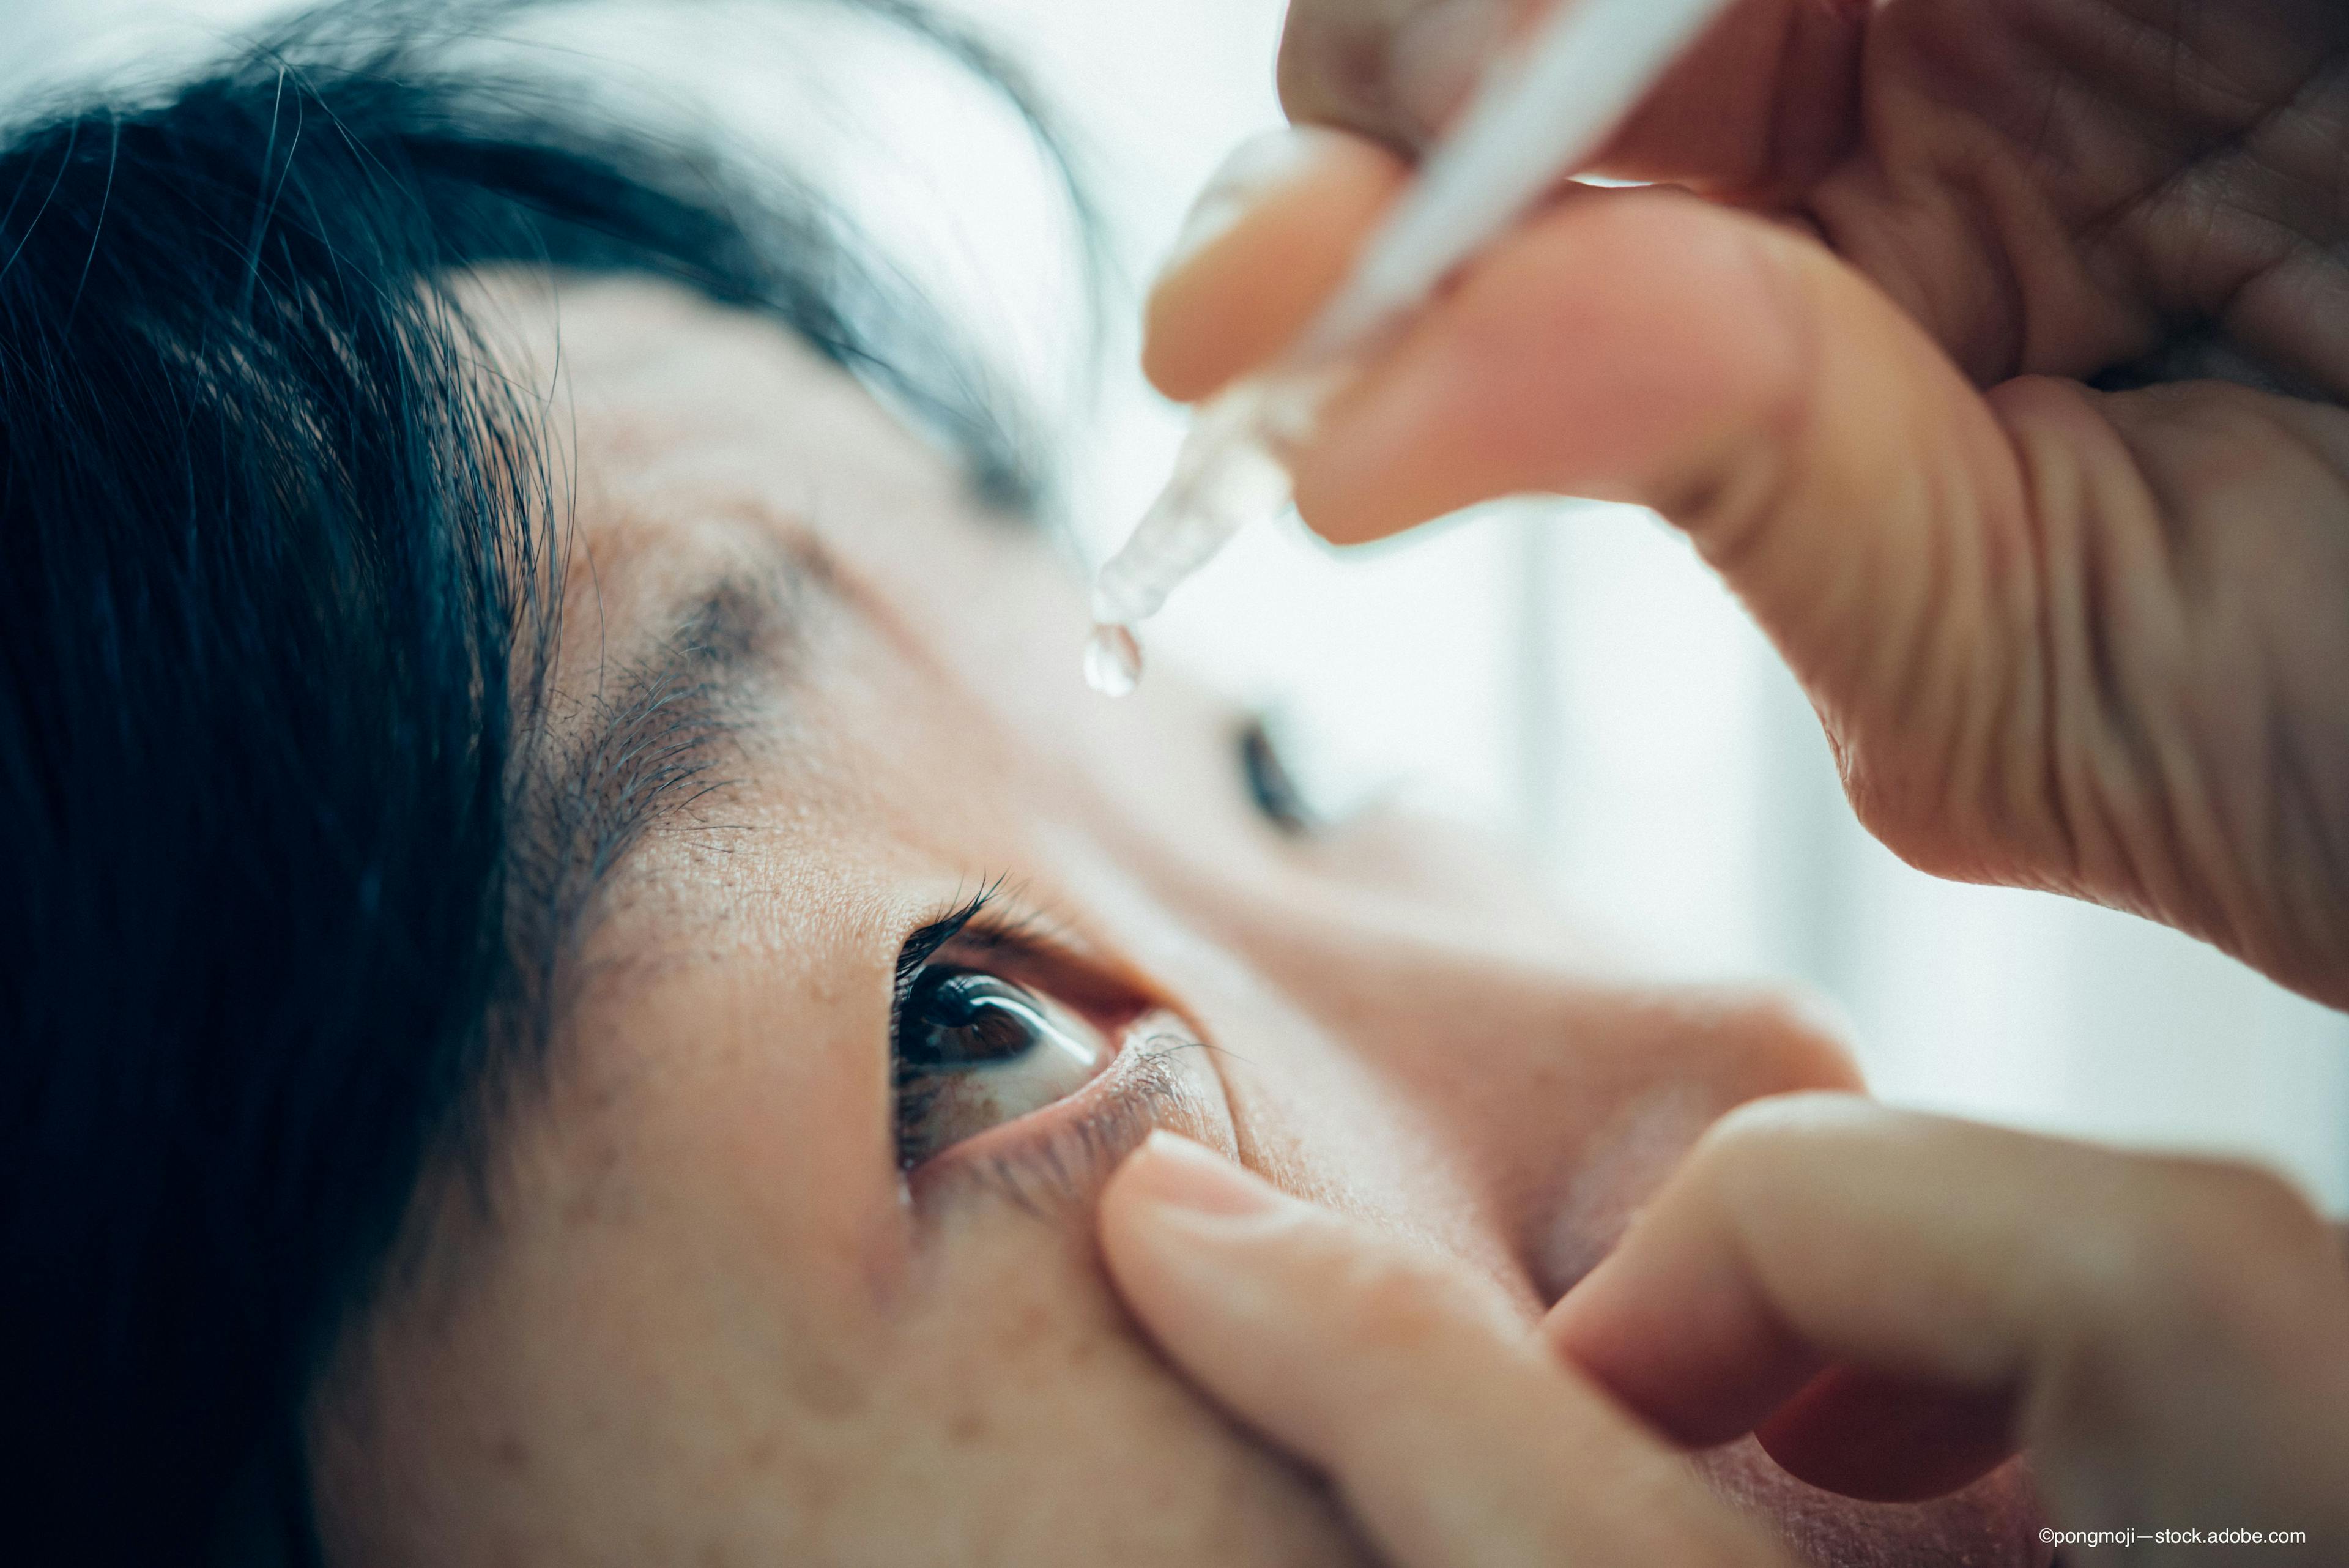 eye drops are now subject to revised draft guidance for ophthalmic drugs - Image credit: Adobe Stock / ©pongmoji